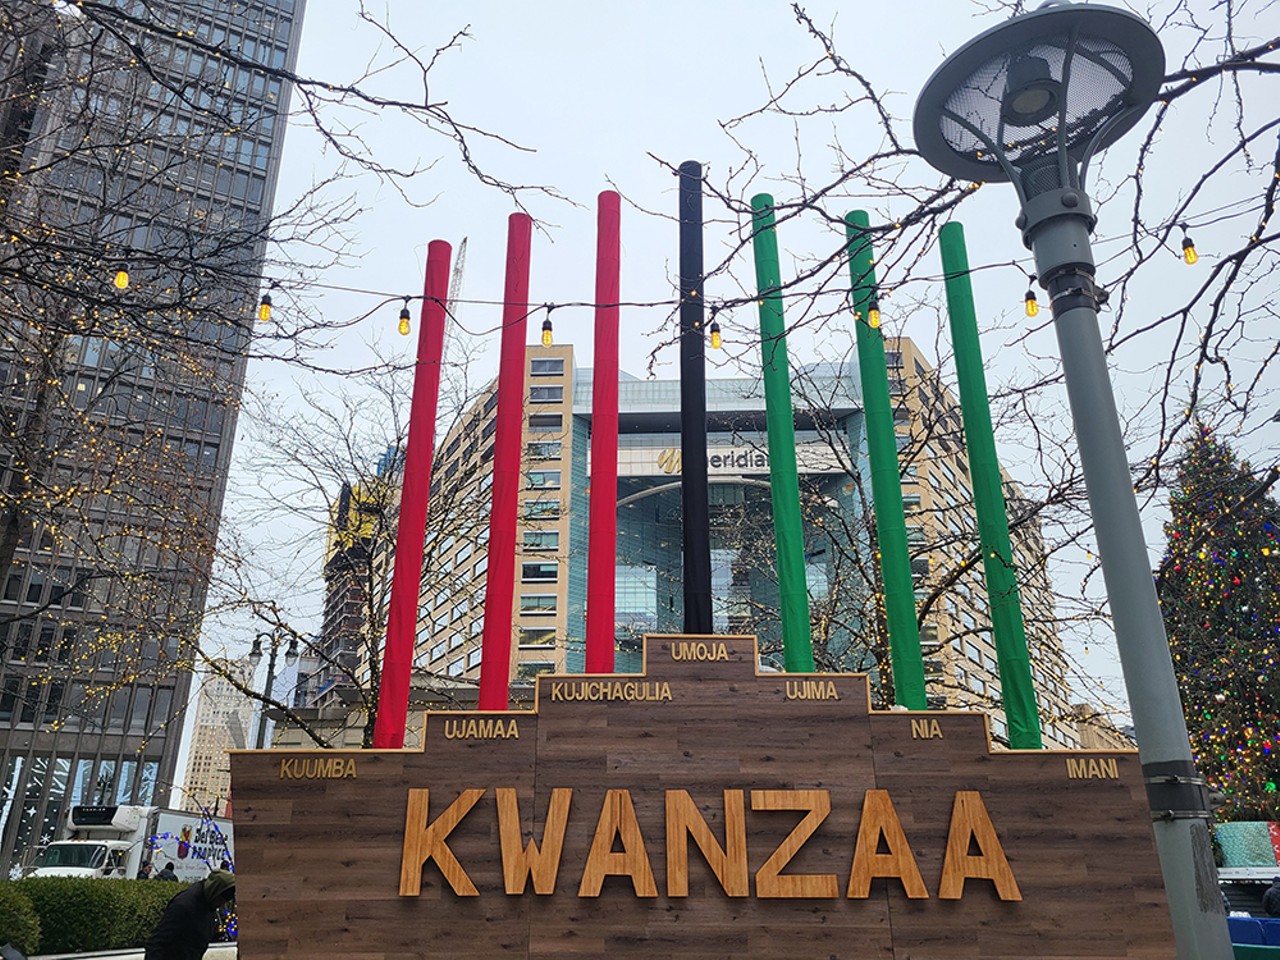 Kwanzaa kinara
Detroit recently became home to the world’s largest Kwanzaa kinara, after starting a new tradition in 2022 of a 30-foot-tall kinara joining the Campus Martius Christmas tree and menorah. This year, the Kwanzaa celebration and kinara lighting will happen on Dec. 26 hosted by the Downtown Detroit Partnership with support from Alkebu-lan Village, Councilman Scott Benson, and the City of Detroit.